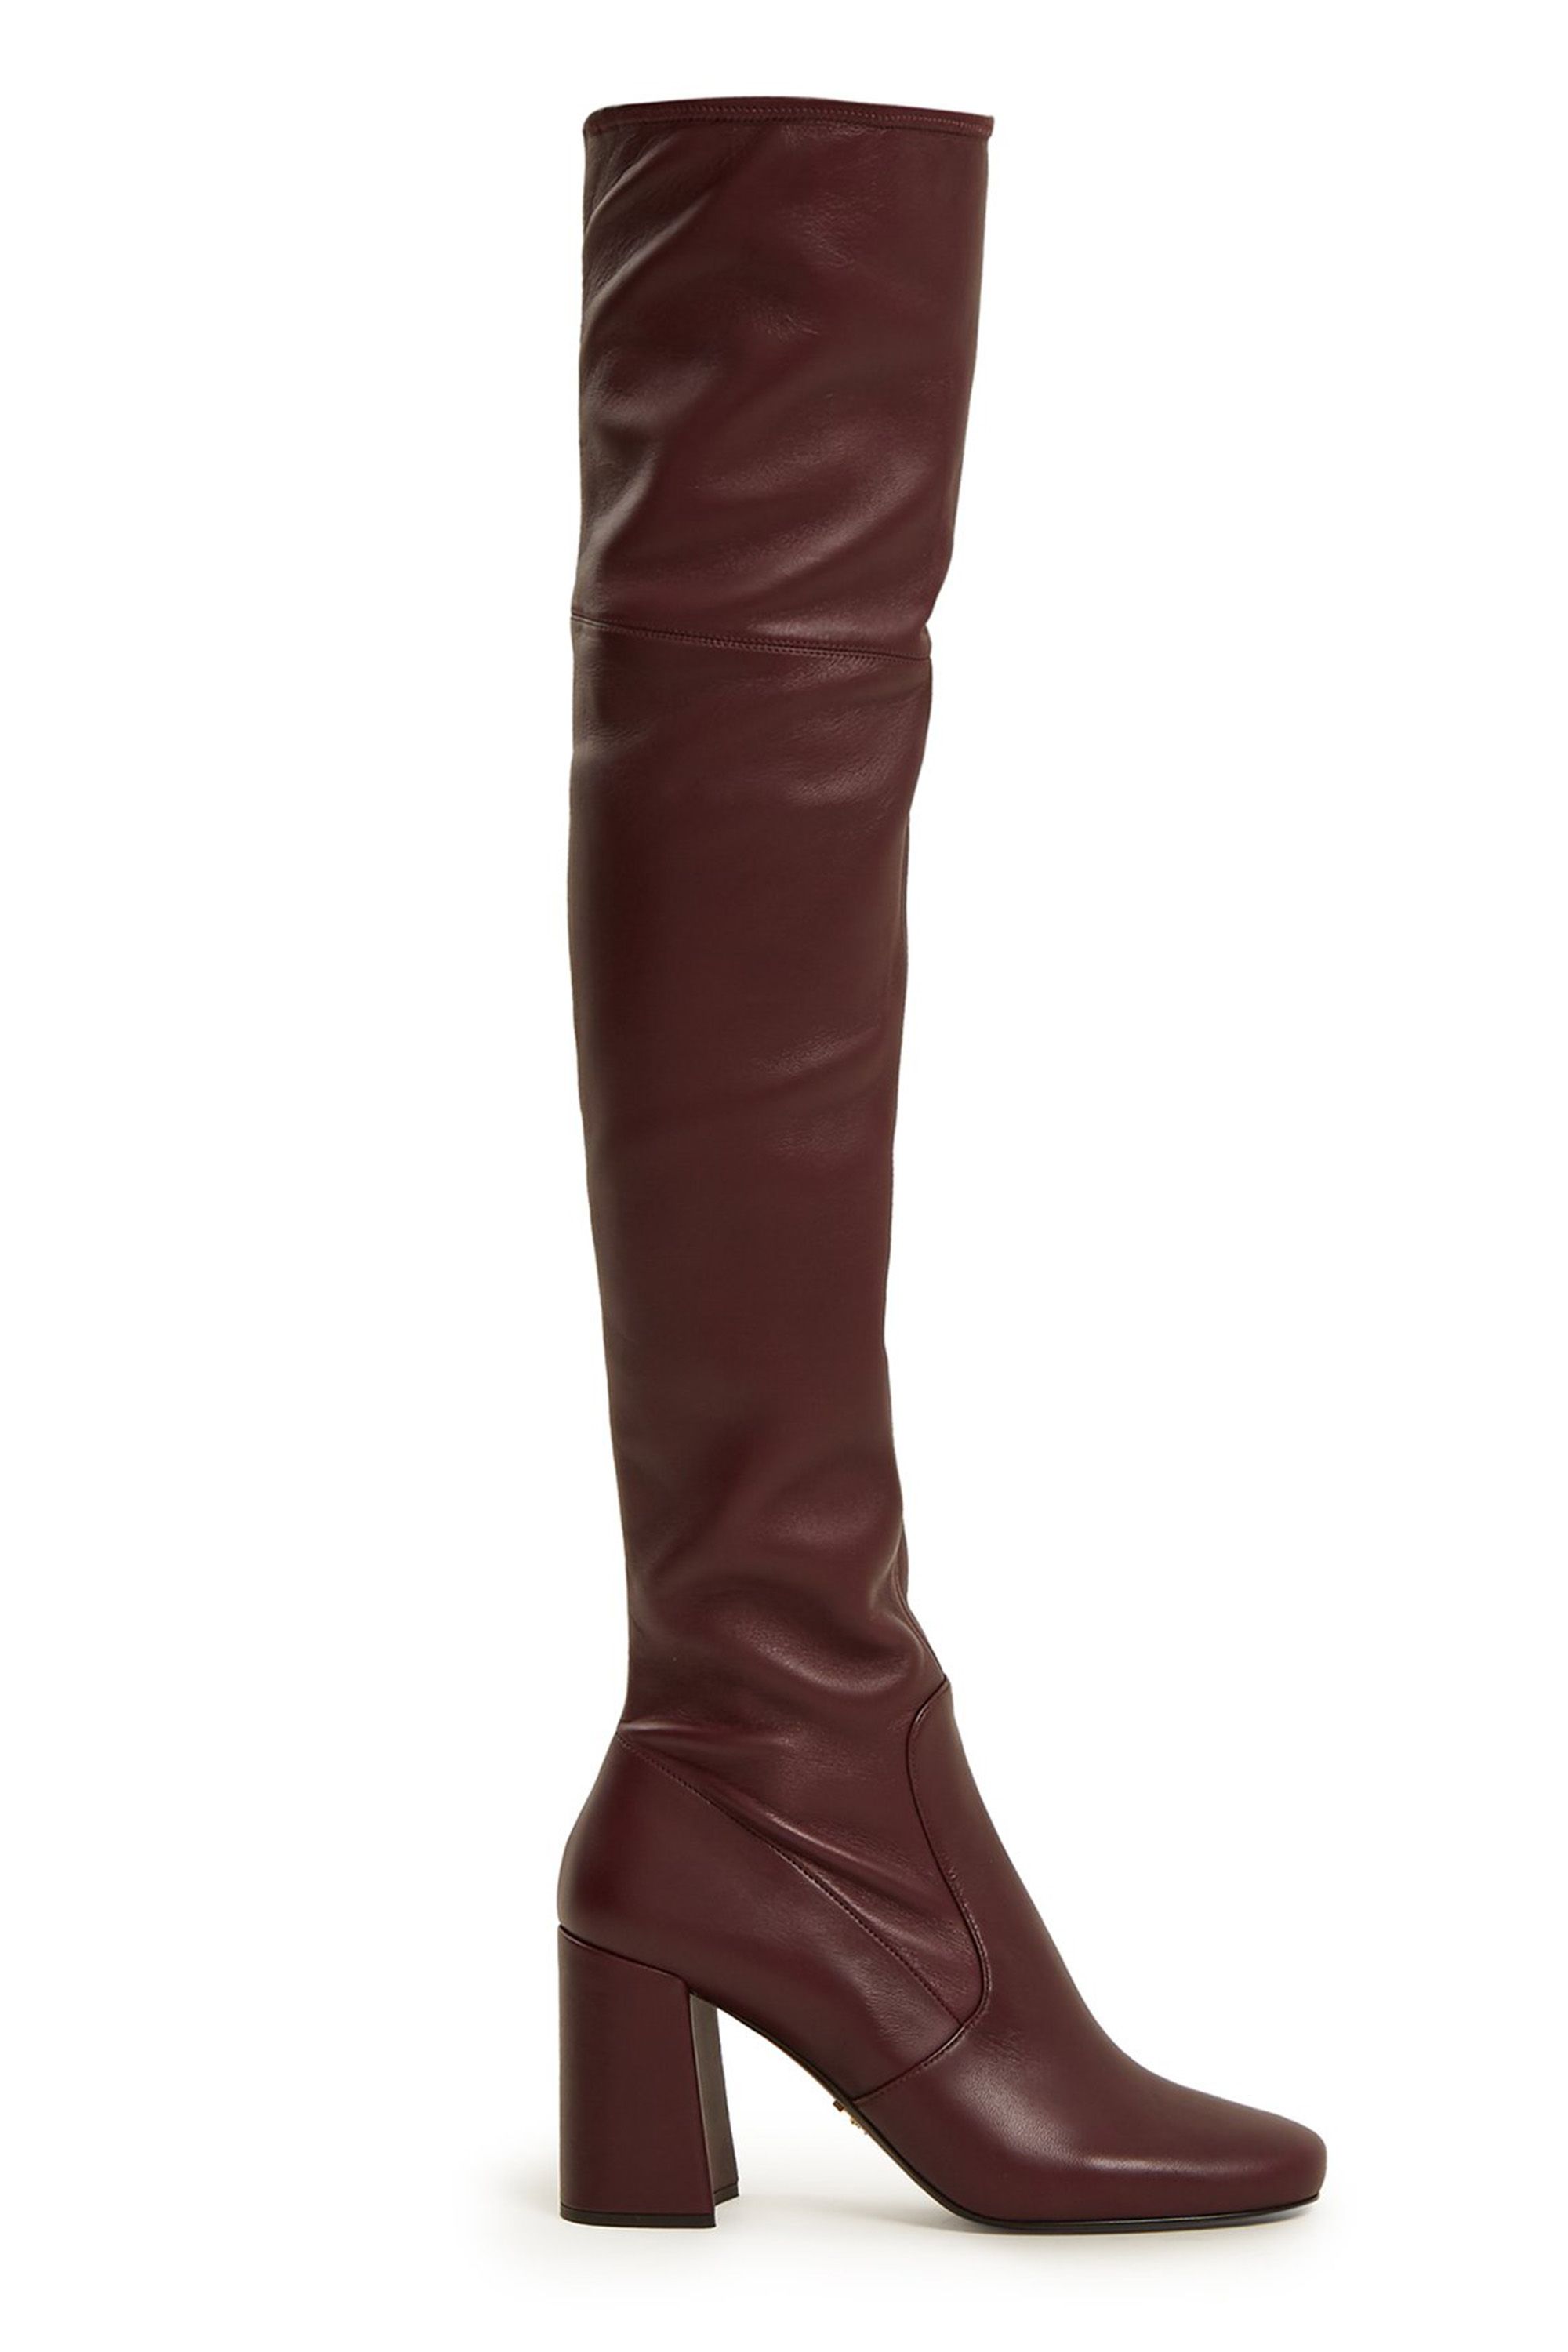 219 over the knee boots